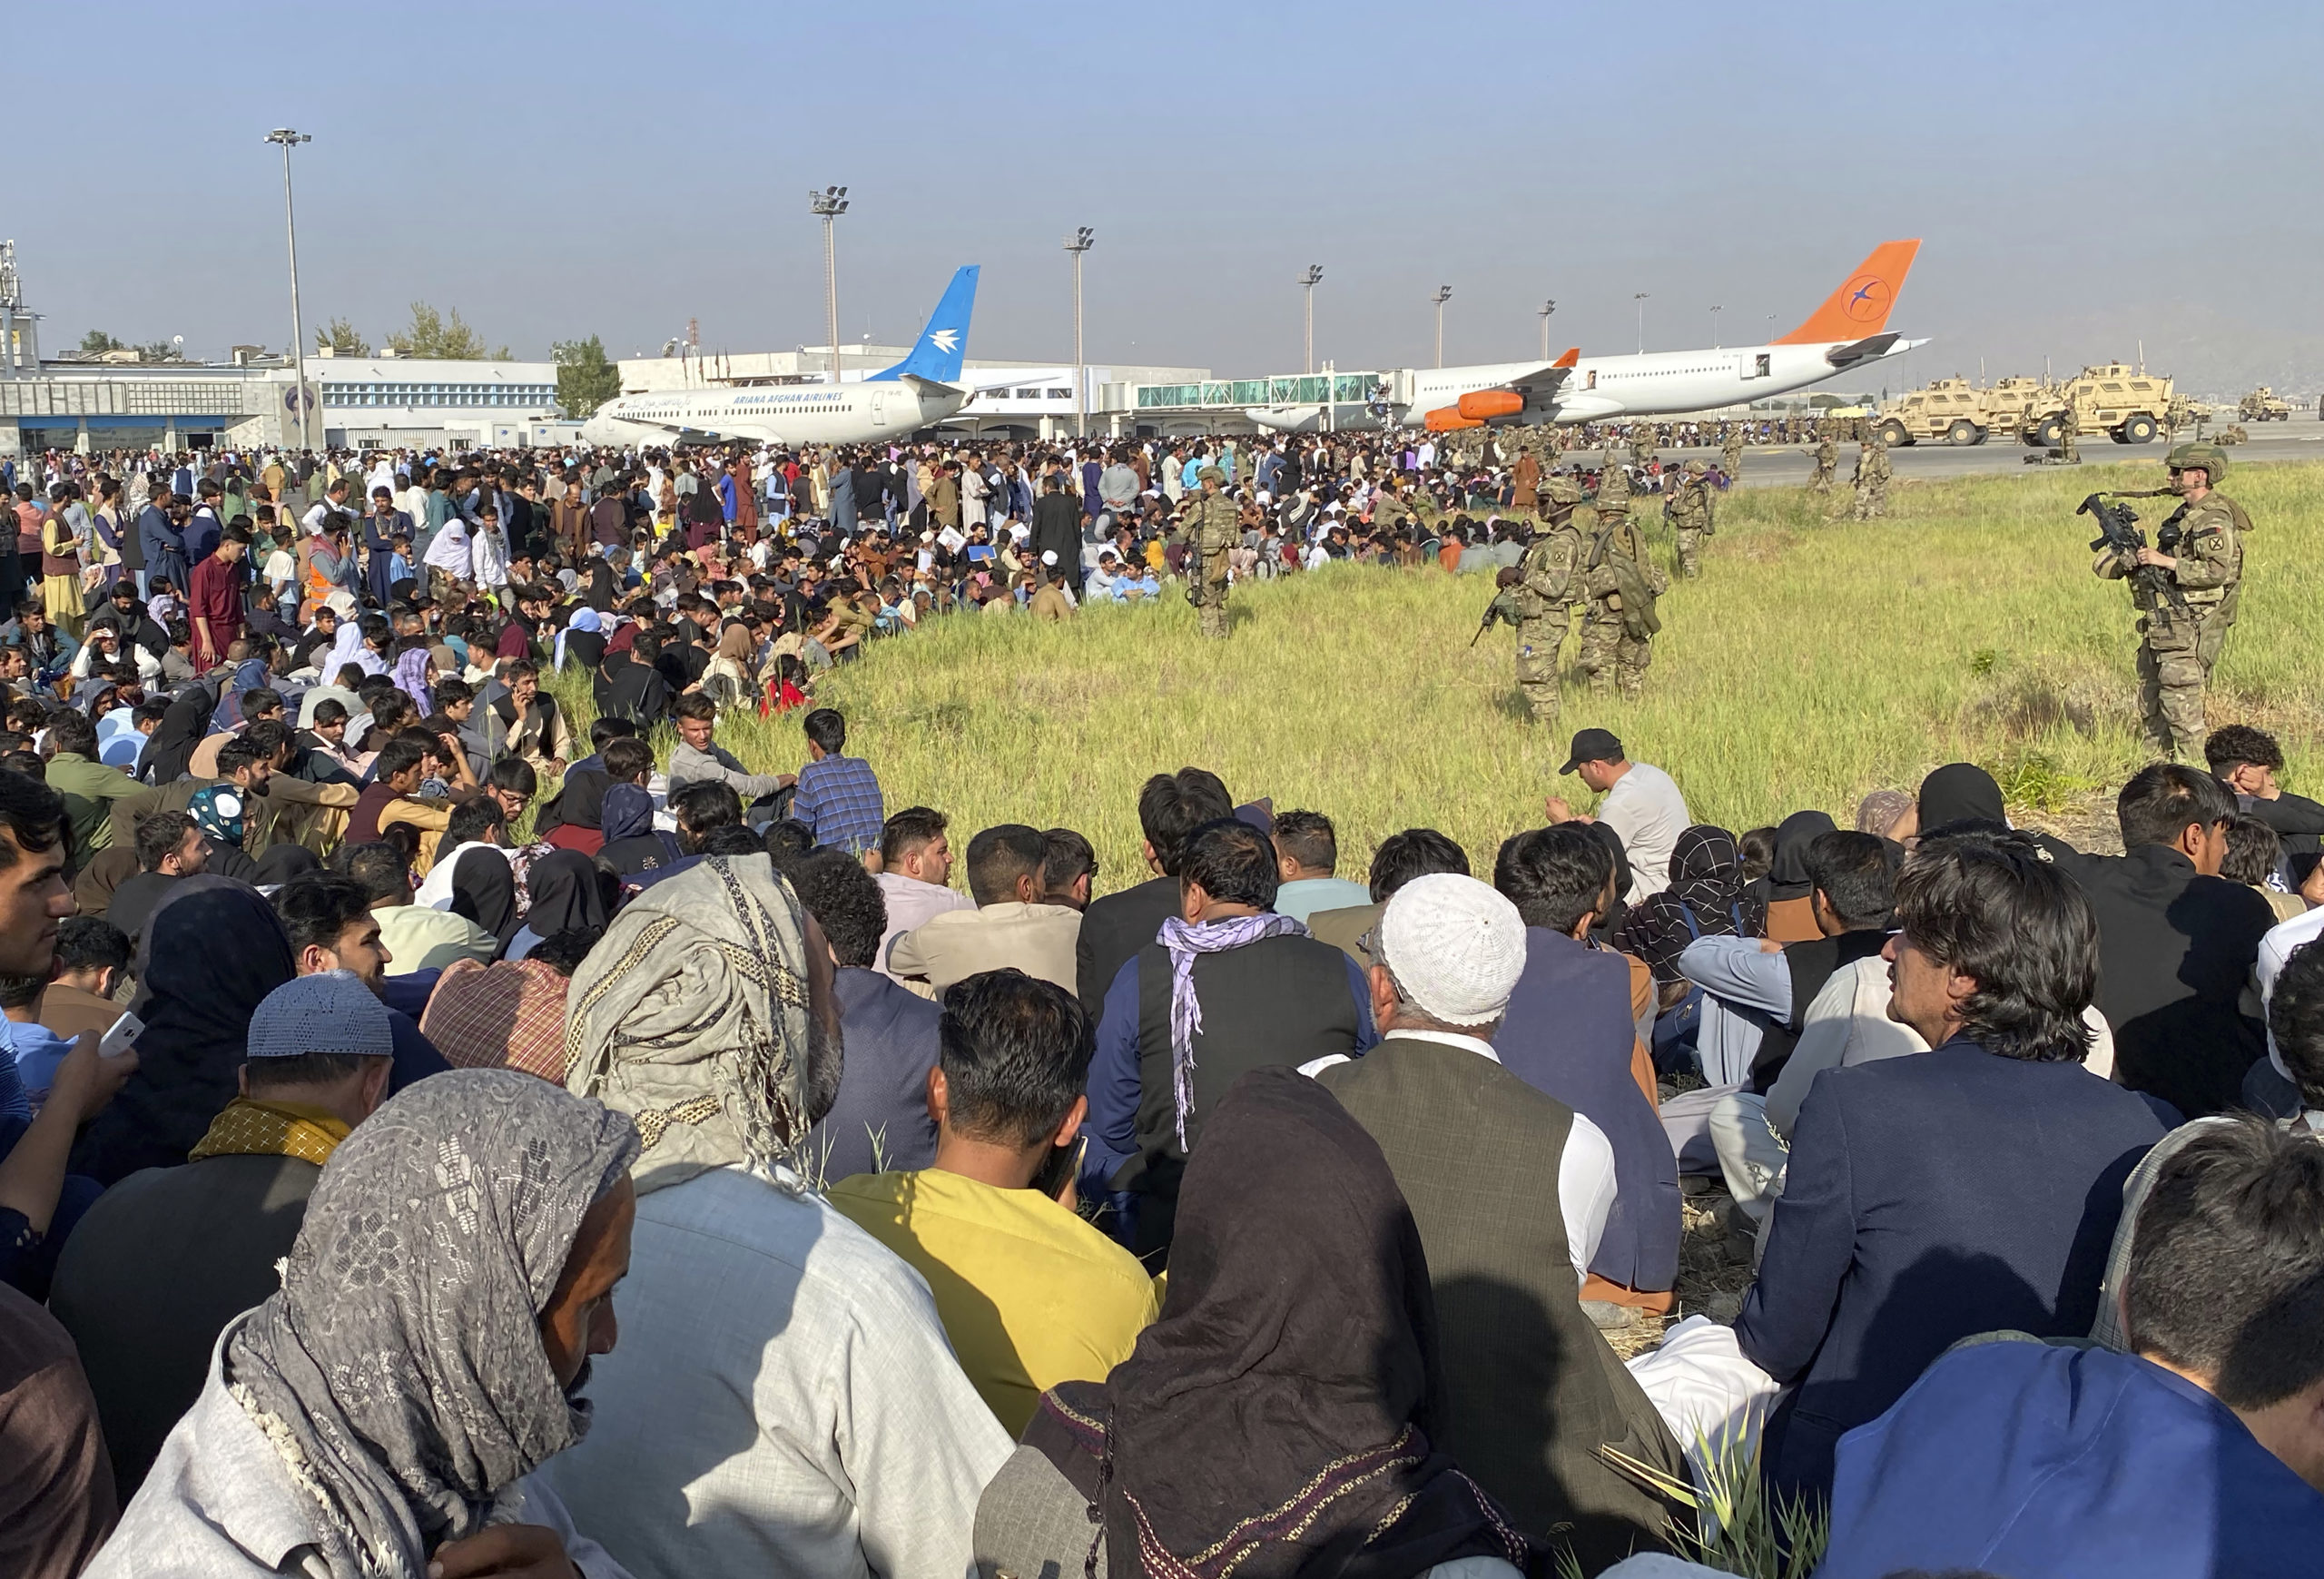 Thousands of Afghans trapped at airport